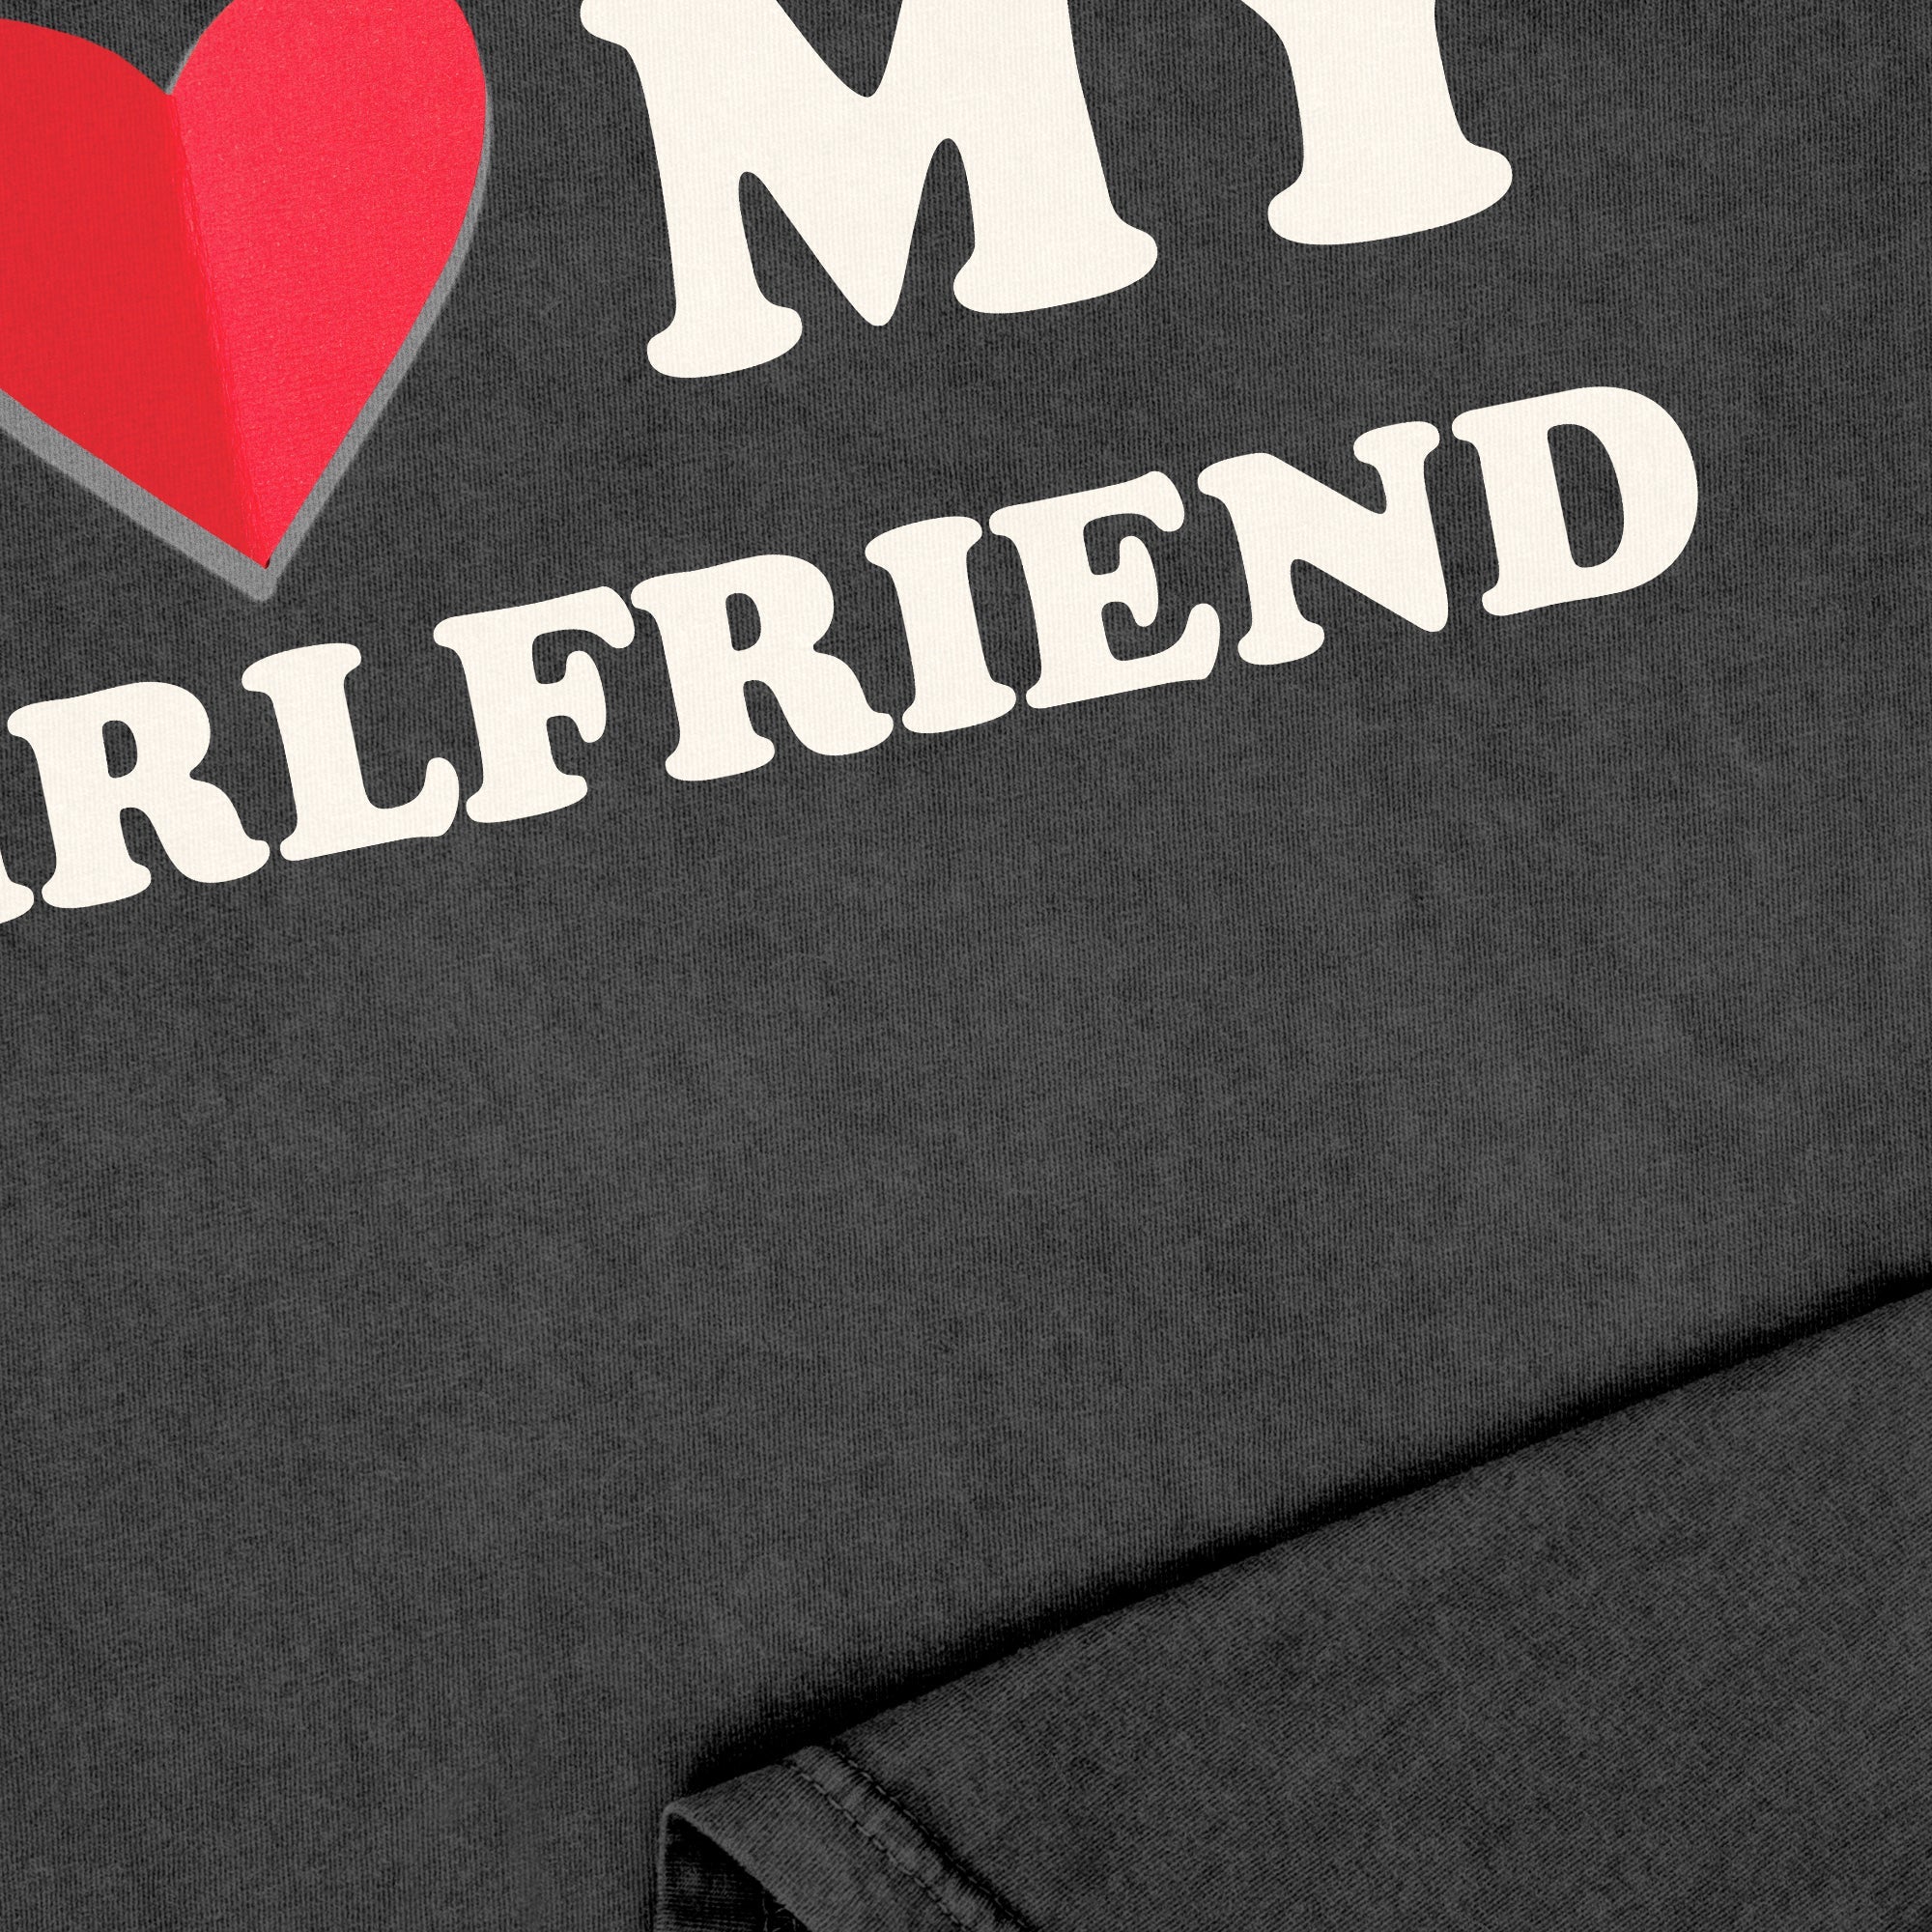 I Heart My Girlfriend Garment-Dyed Tee - Stories You Can Wear